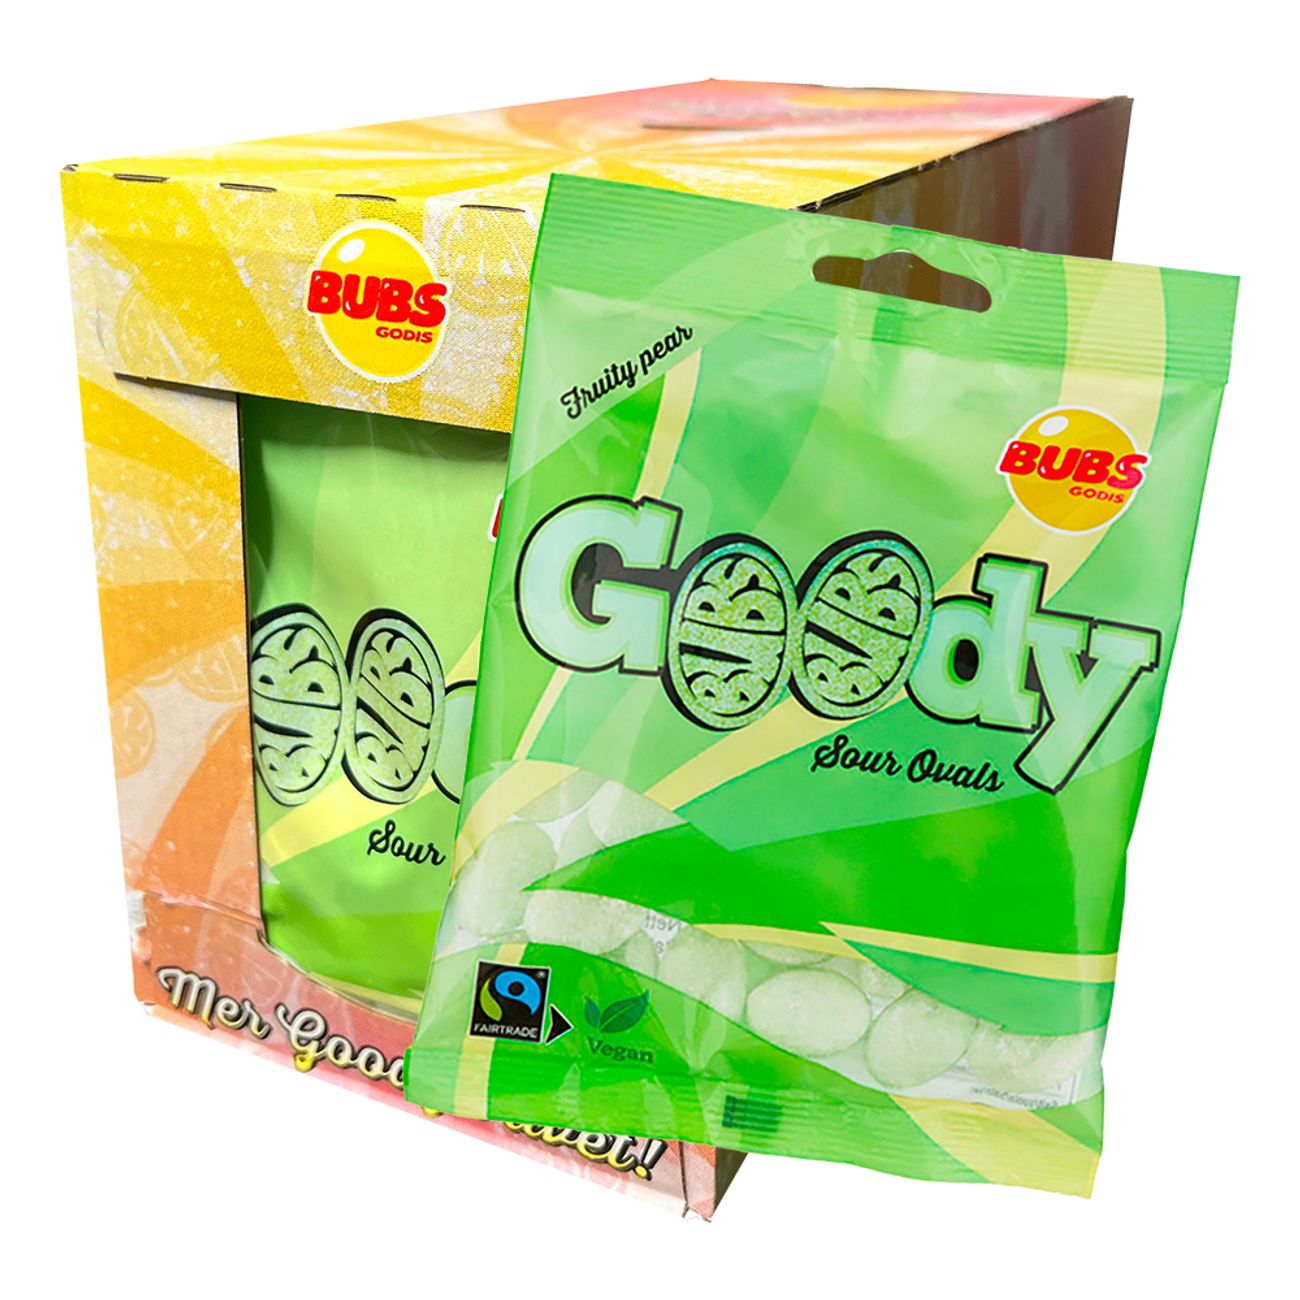 bubs-goody-fruity-pear-storpack-85031-2